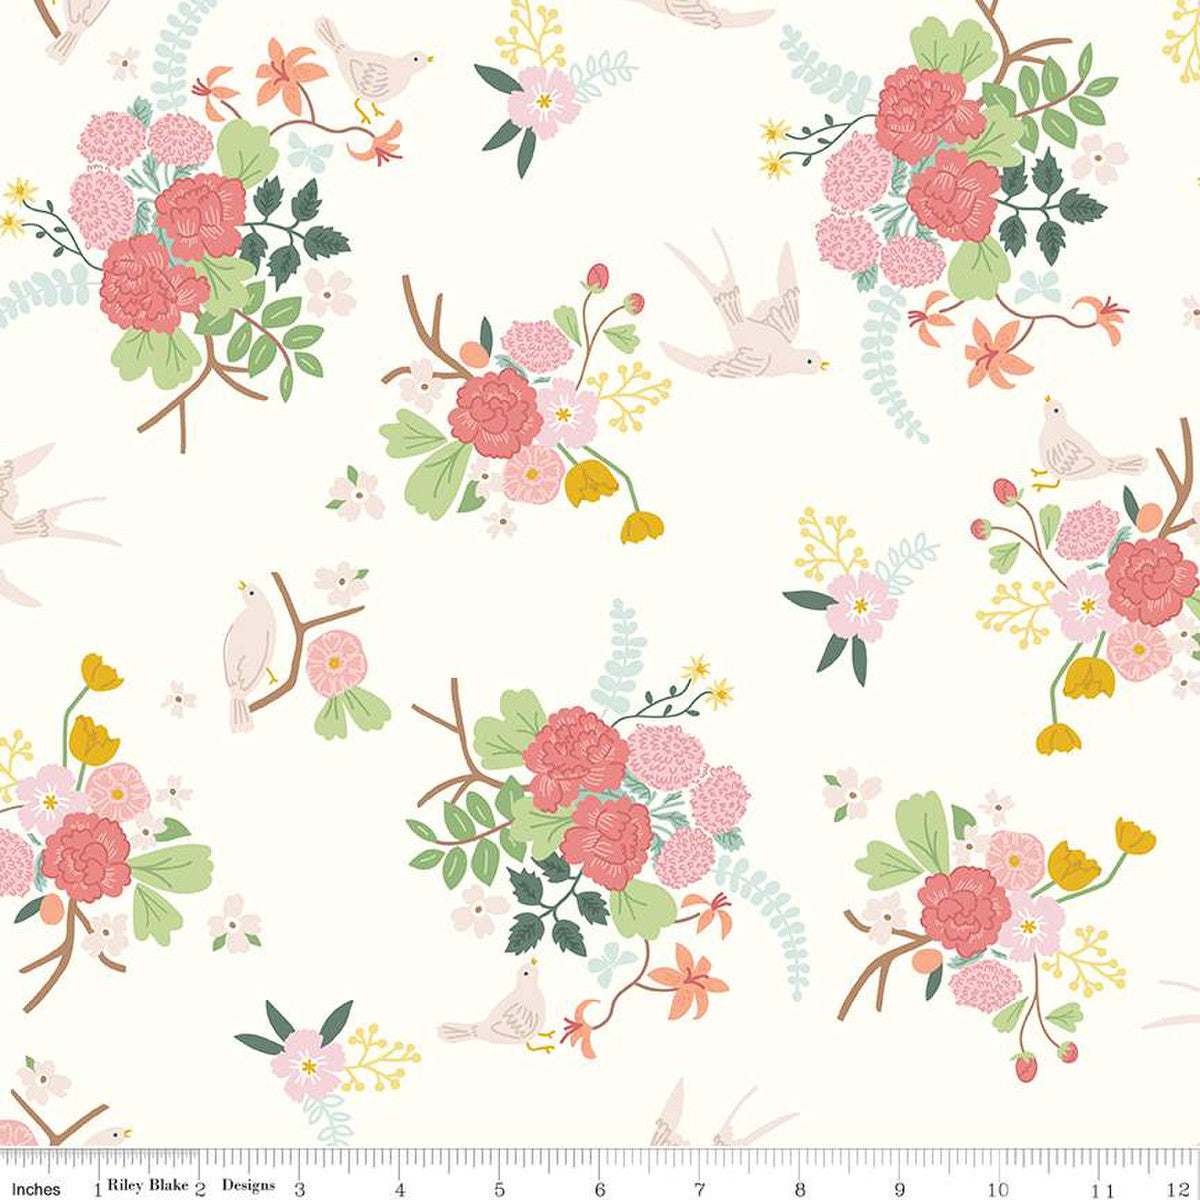 Emma Main Print by Citrus + Mint for Riley Blake Designs Cream background with bouquets of flowers including peonies poppies mums in shades of pink with stems and leaves in green swallows fly in between the florals soft and beautiful high quality designer fabric for piecing quilts garments clothing bags and sewing projects material